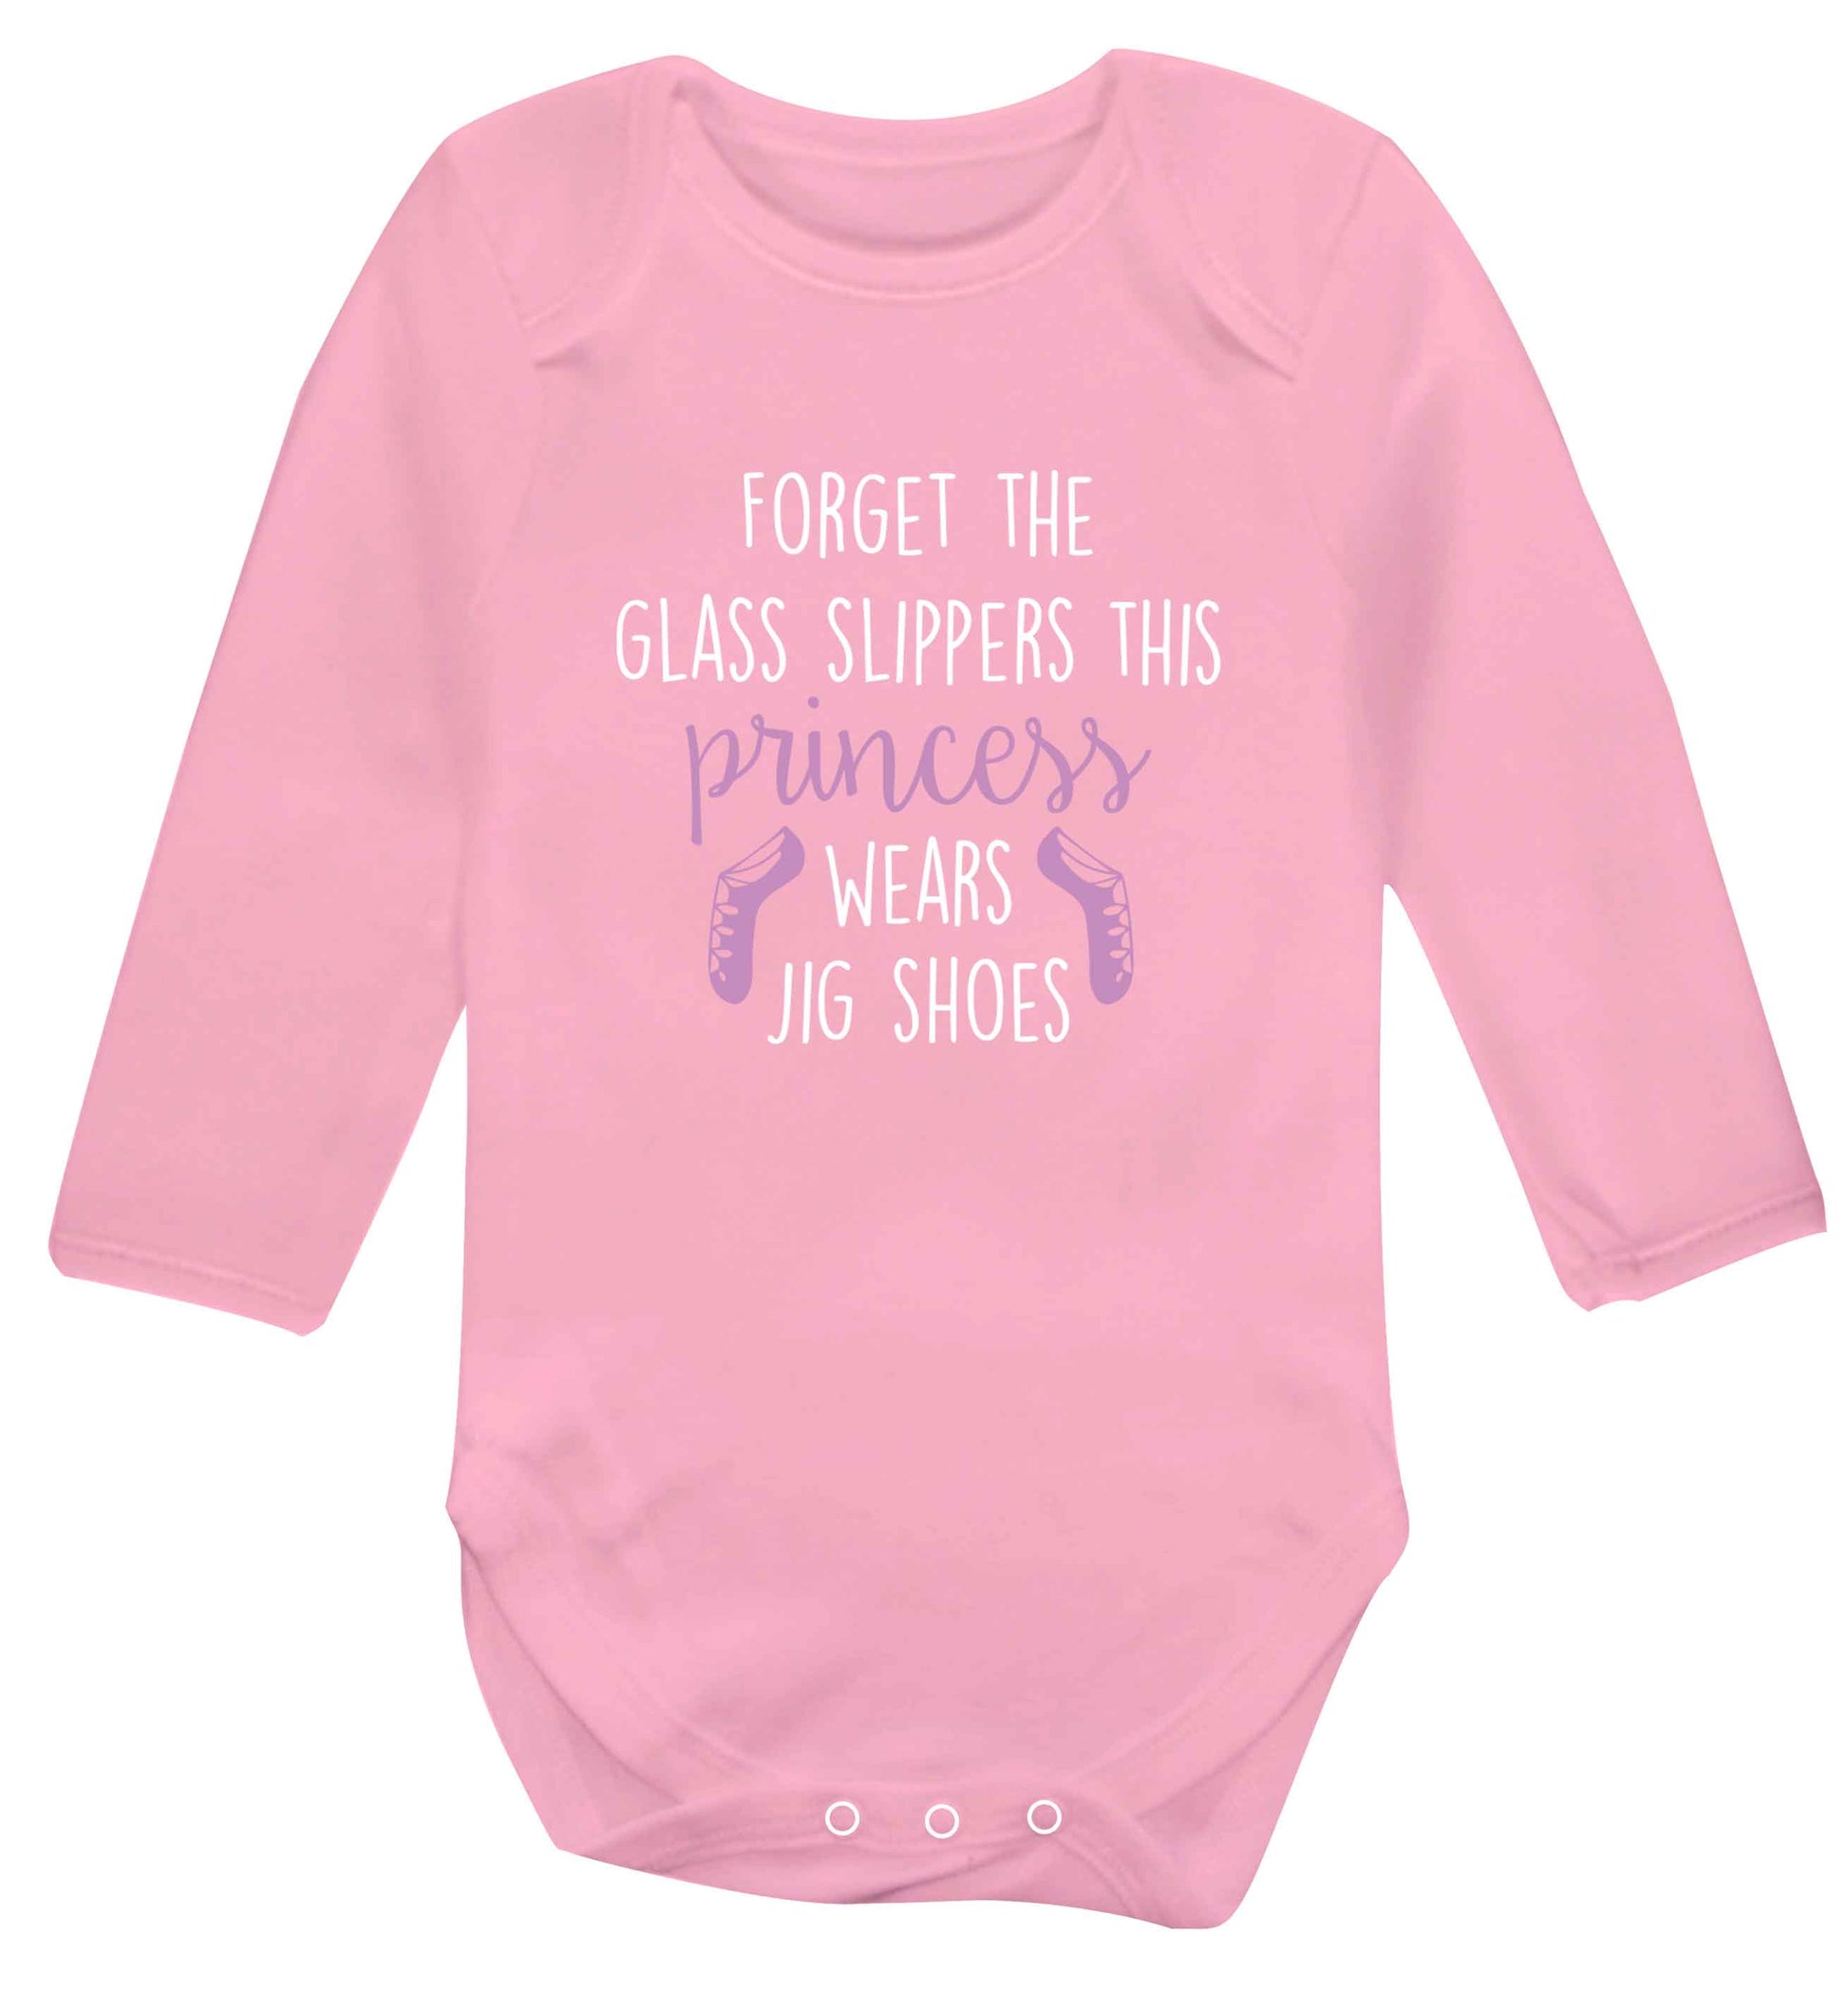 This princess wears jig shoes baby vest long sleeved pale pink 6-12 months